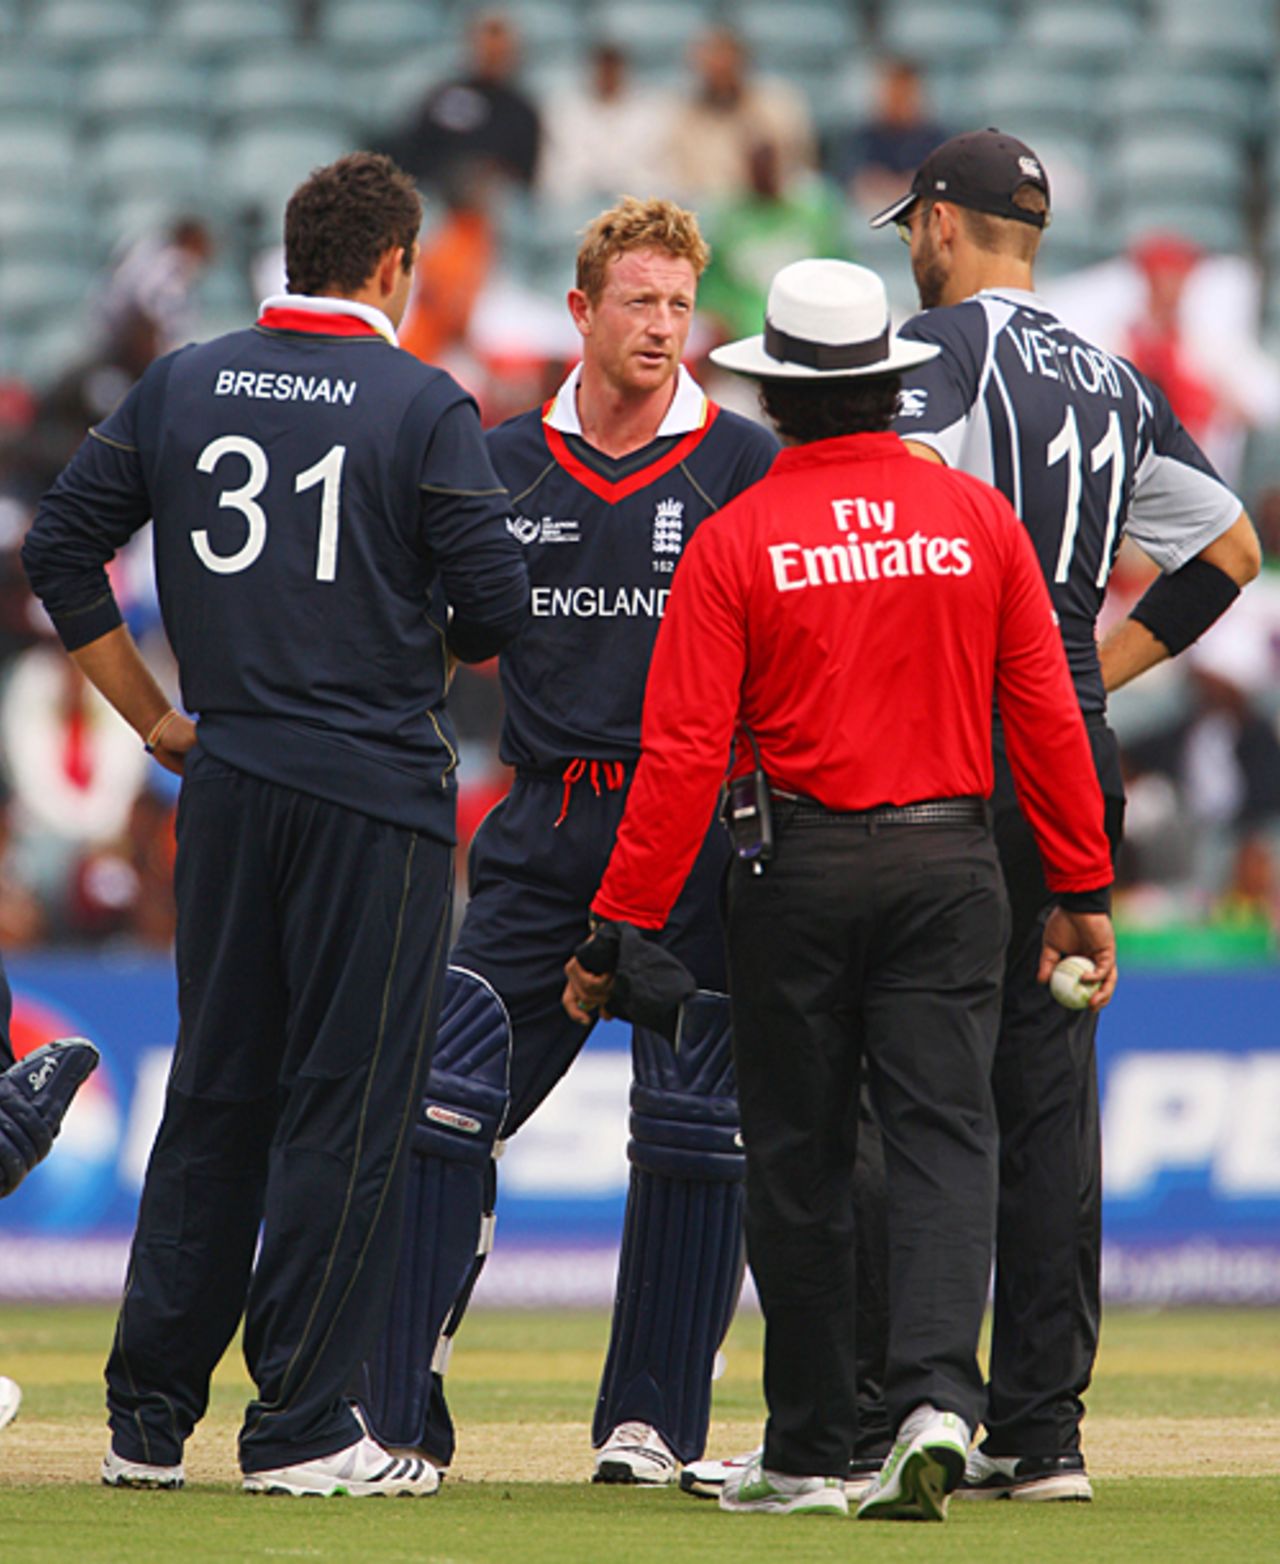 Debate ensues over a run-out involving Paul Collingwood, England v New Zealand, ICC Champions Trophy, Group B, Johannesburg, September 29, 2009